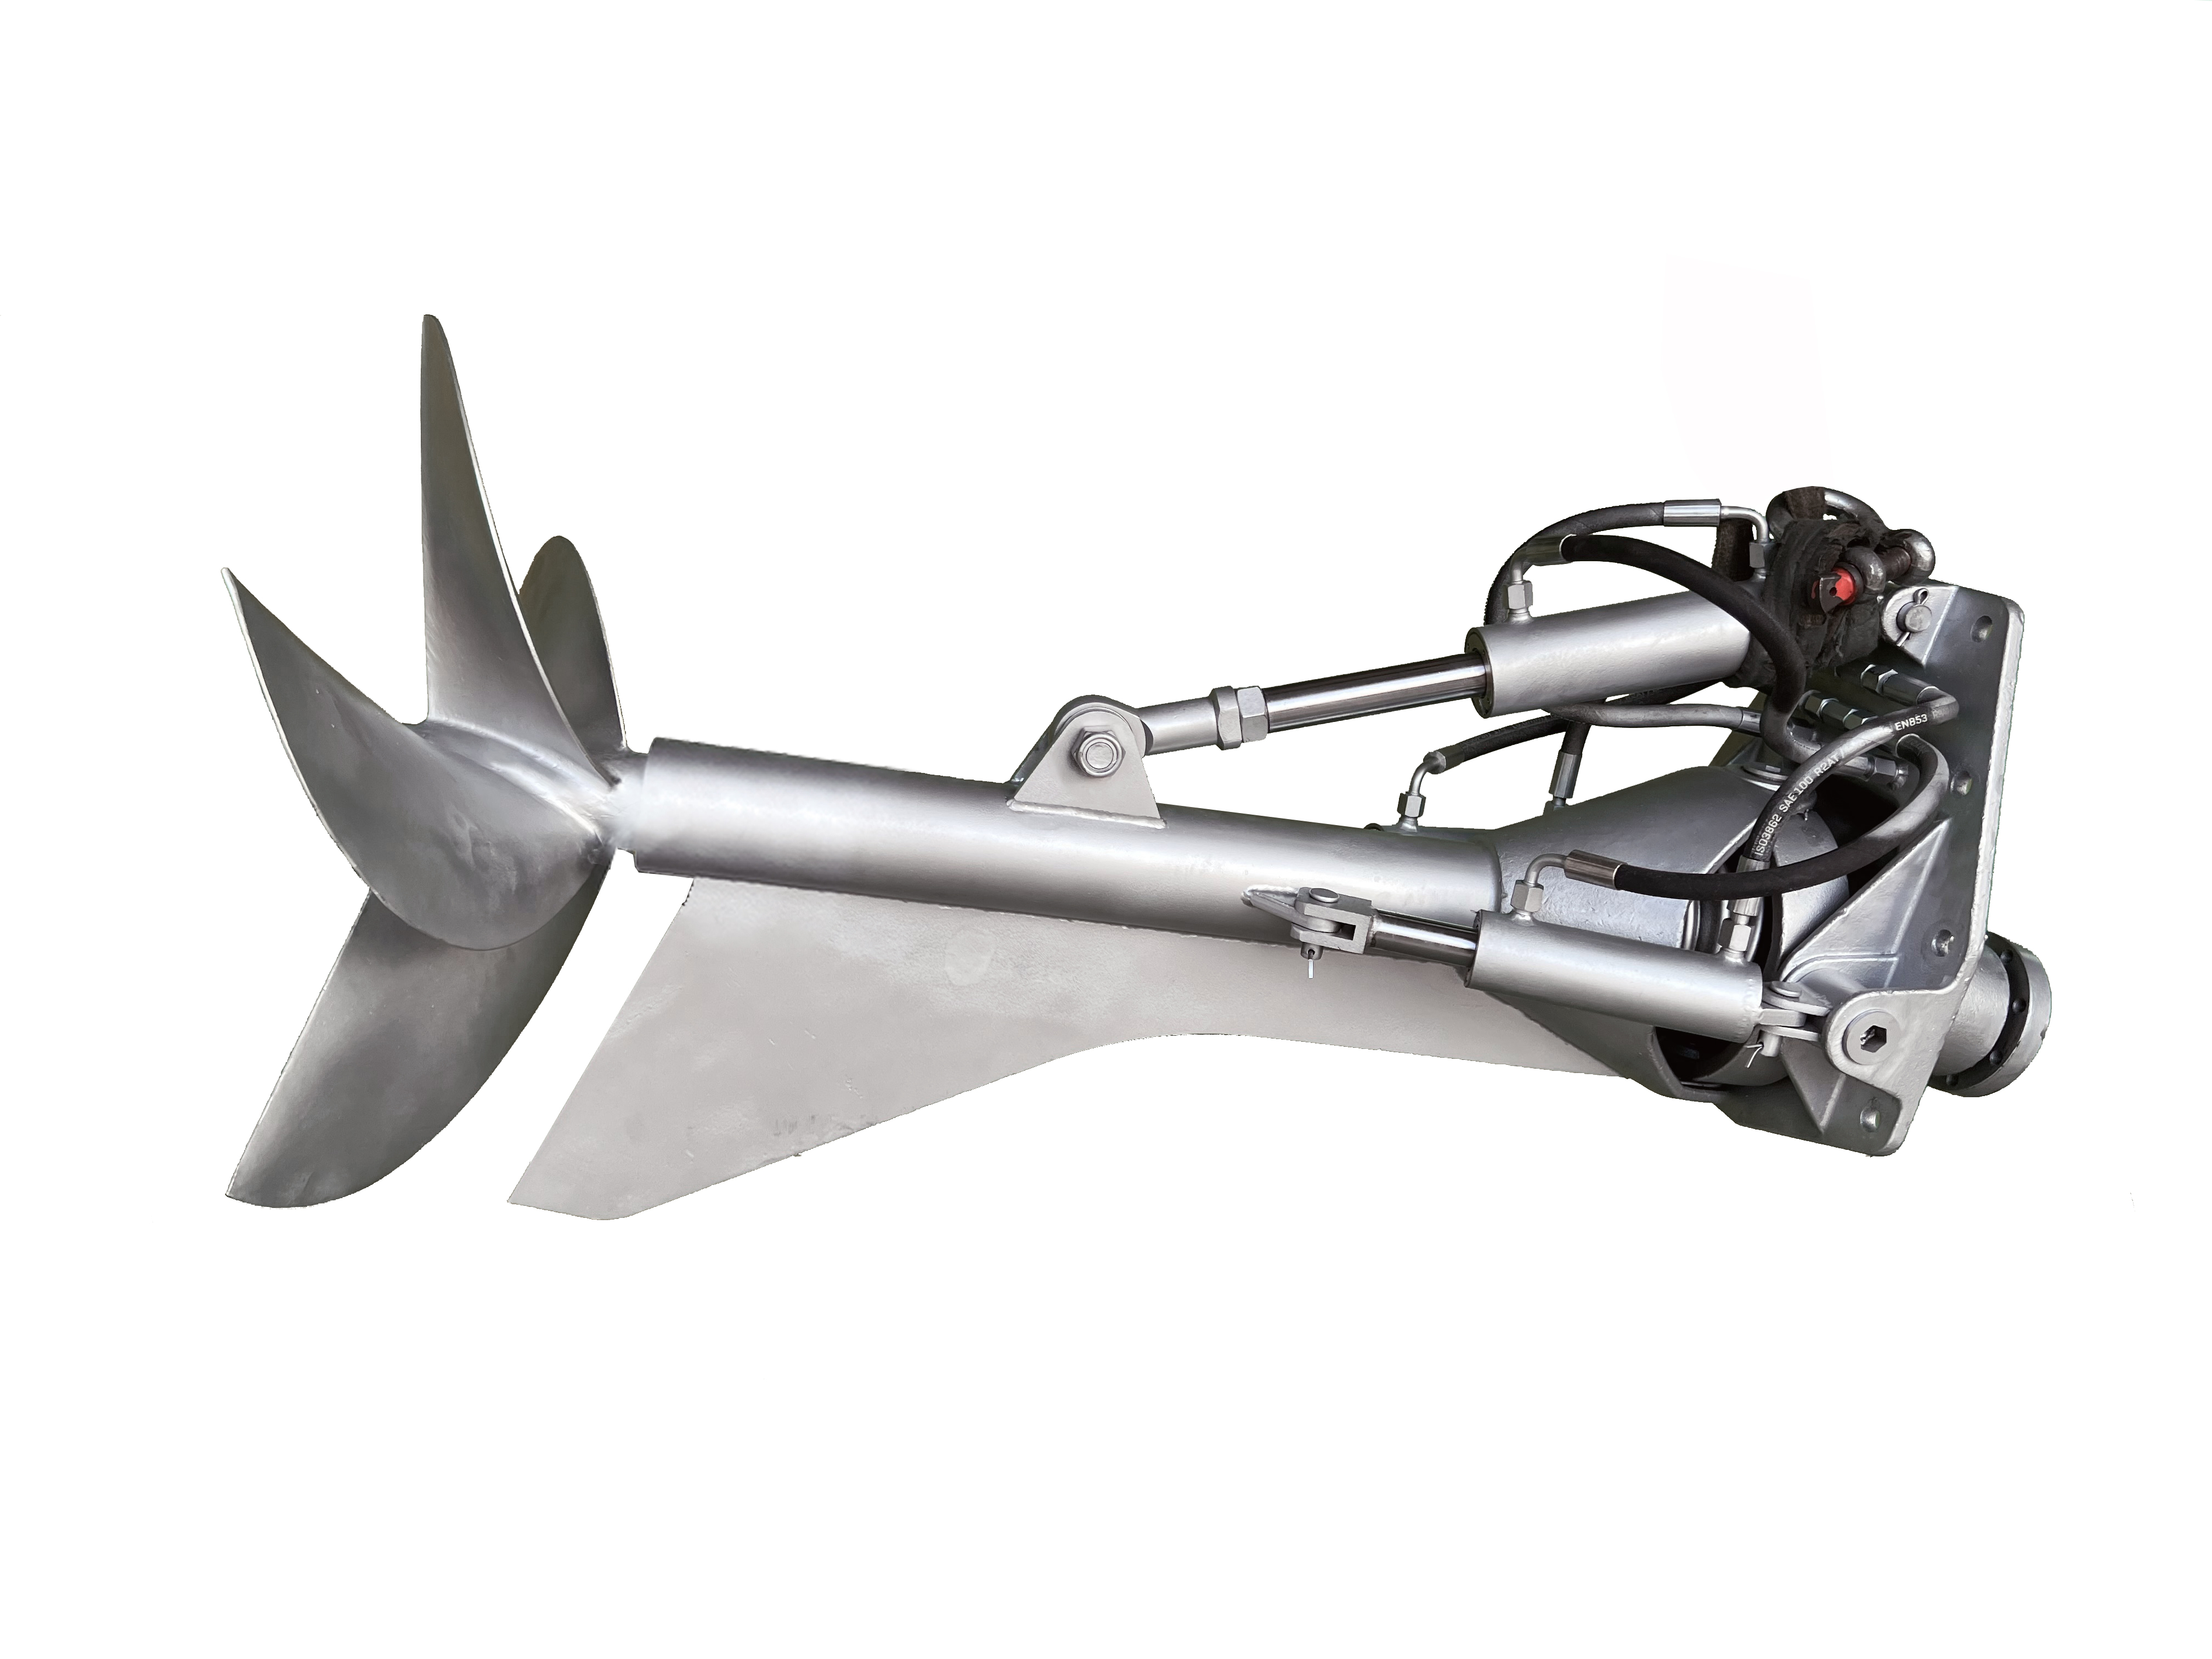 BH550 TSD 150-250Hp Surface drive propeller can lift and steel with CCS Certificate